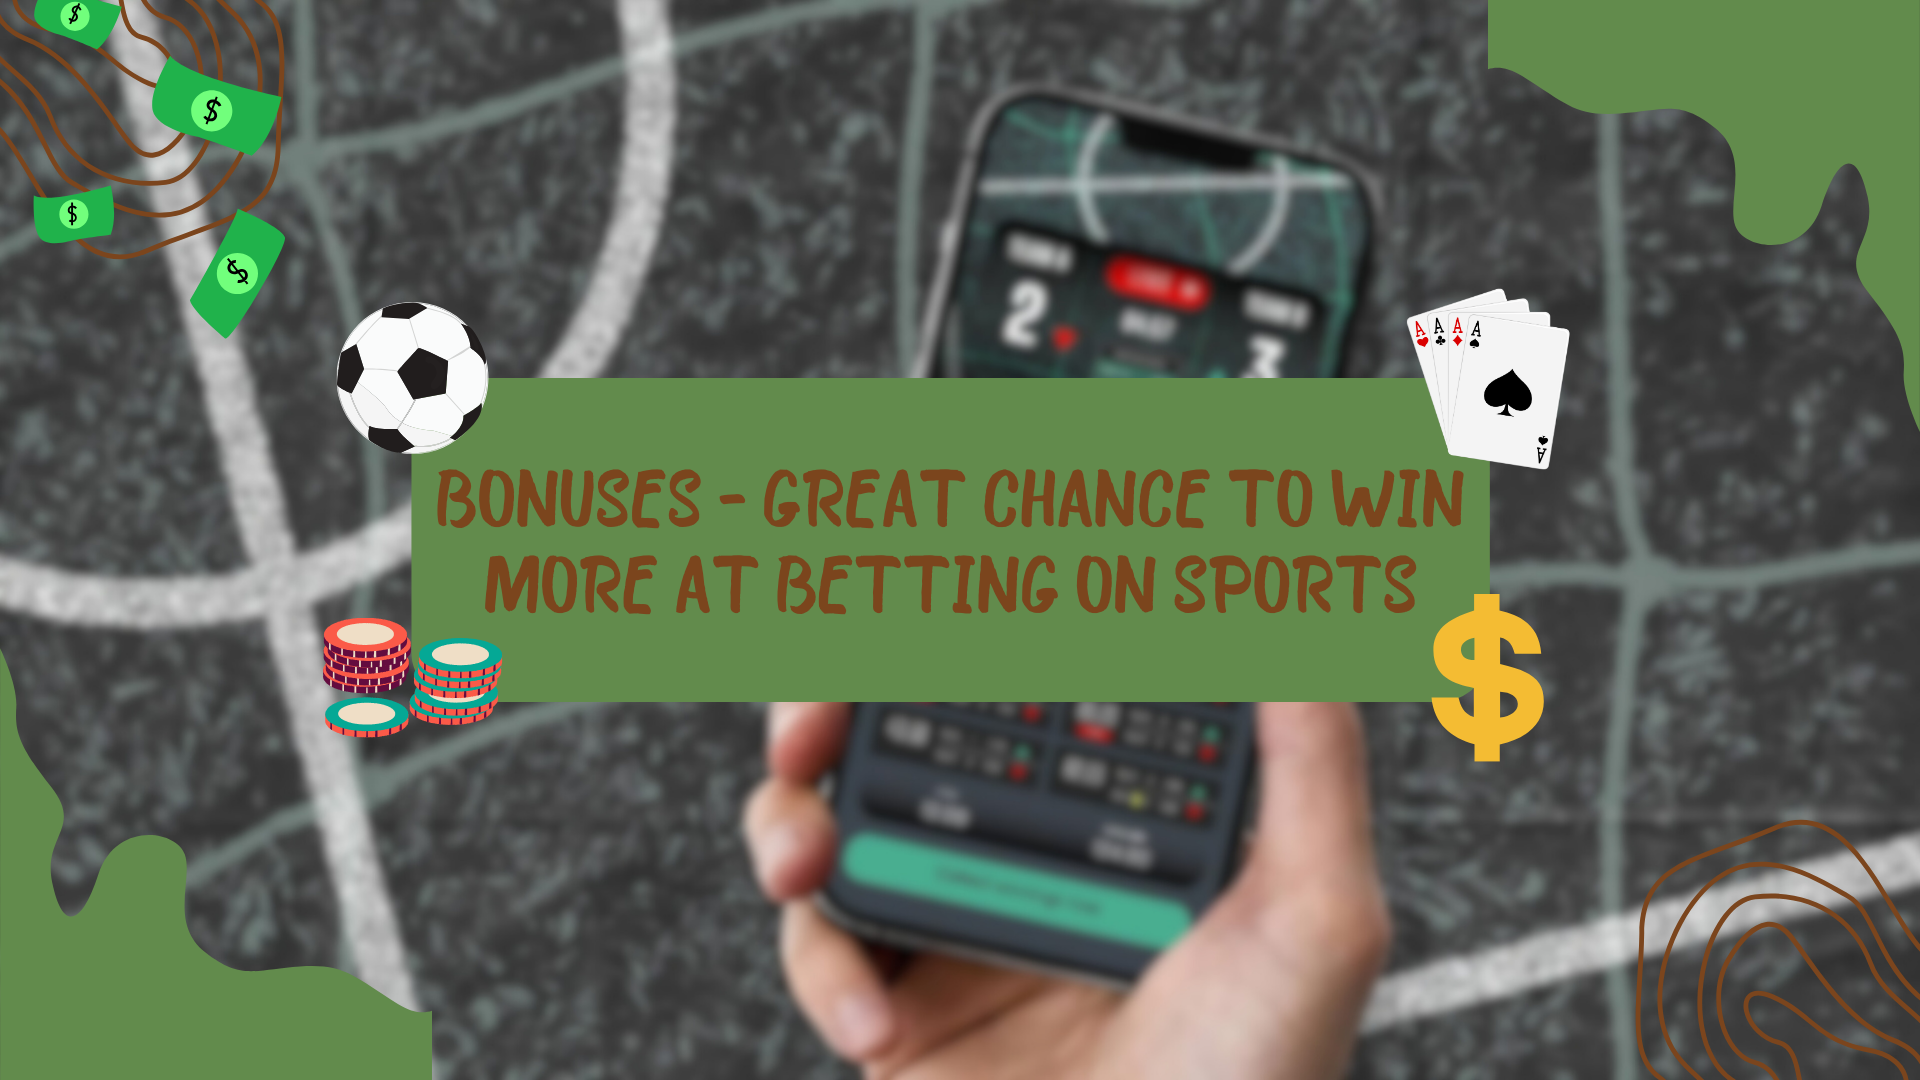 Bonuses - Great Chance to Win More at Betting on Sports